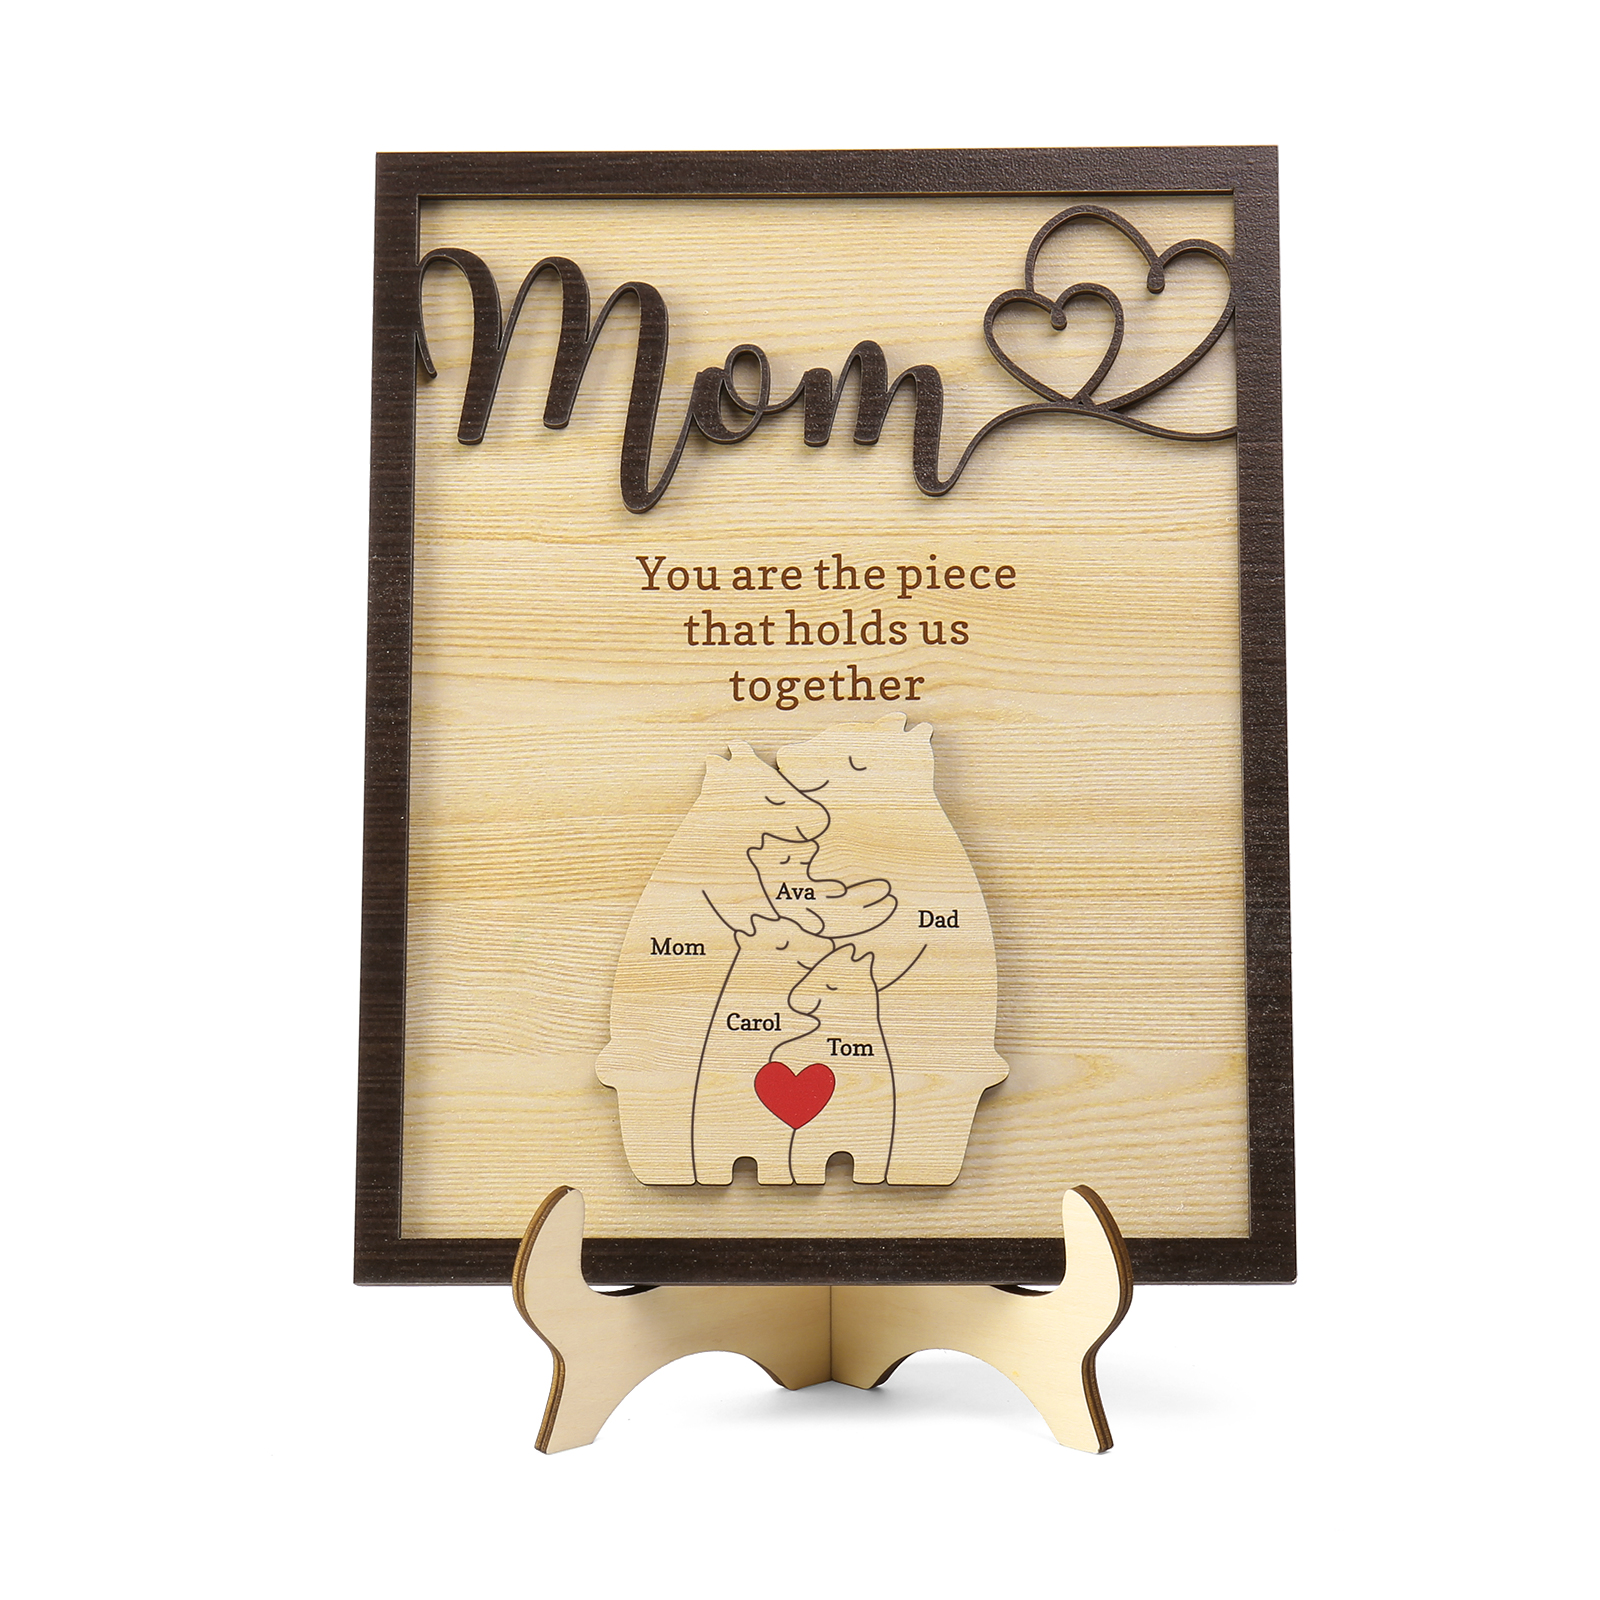 5 Names - Personalized Home Frame Wooden Ornaments Cute Bear Style Customizable 2 Text Ornaments For Mom